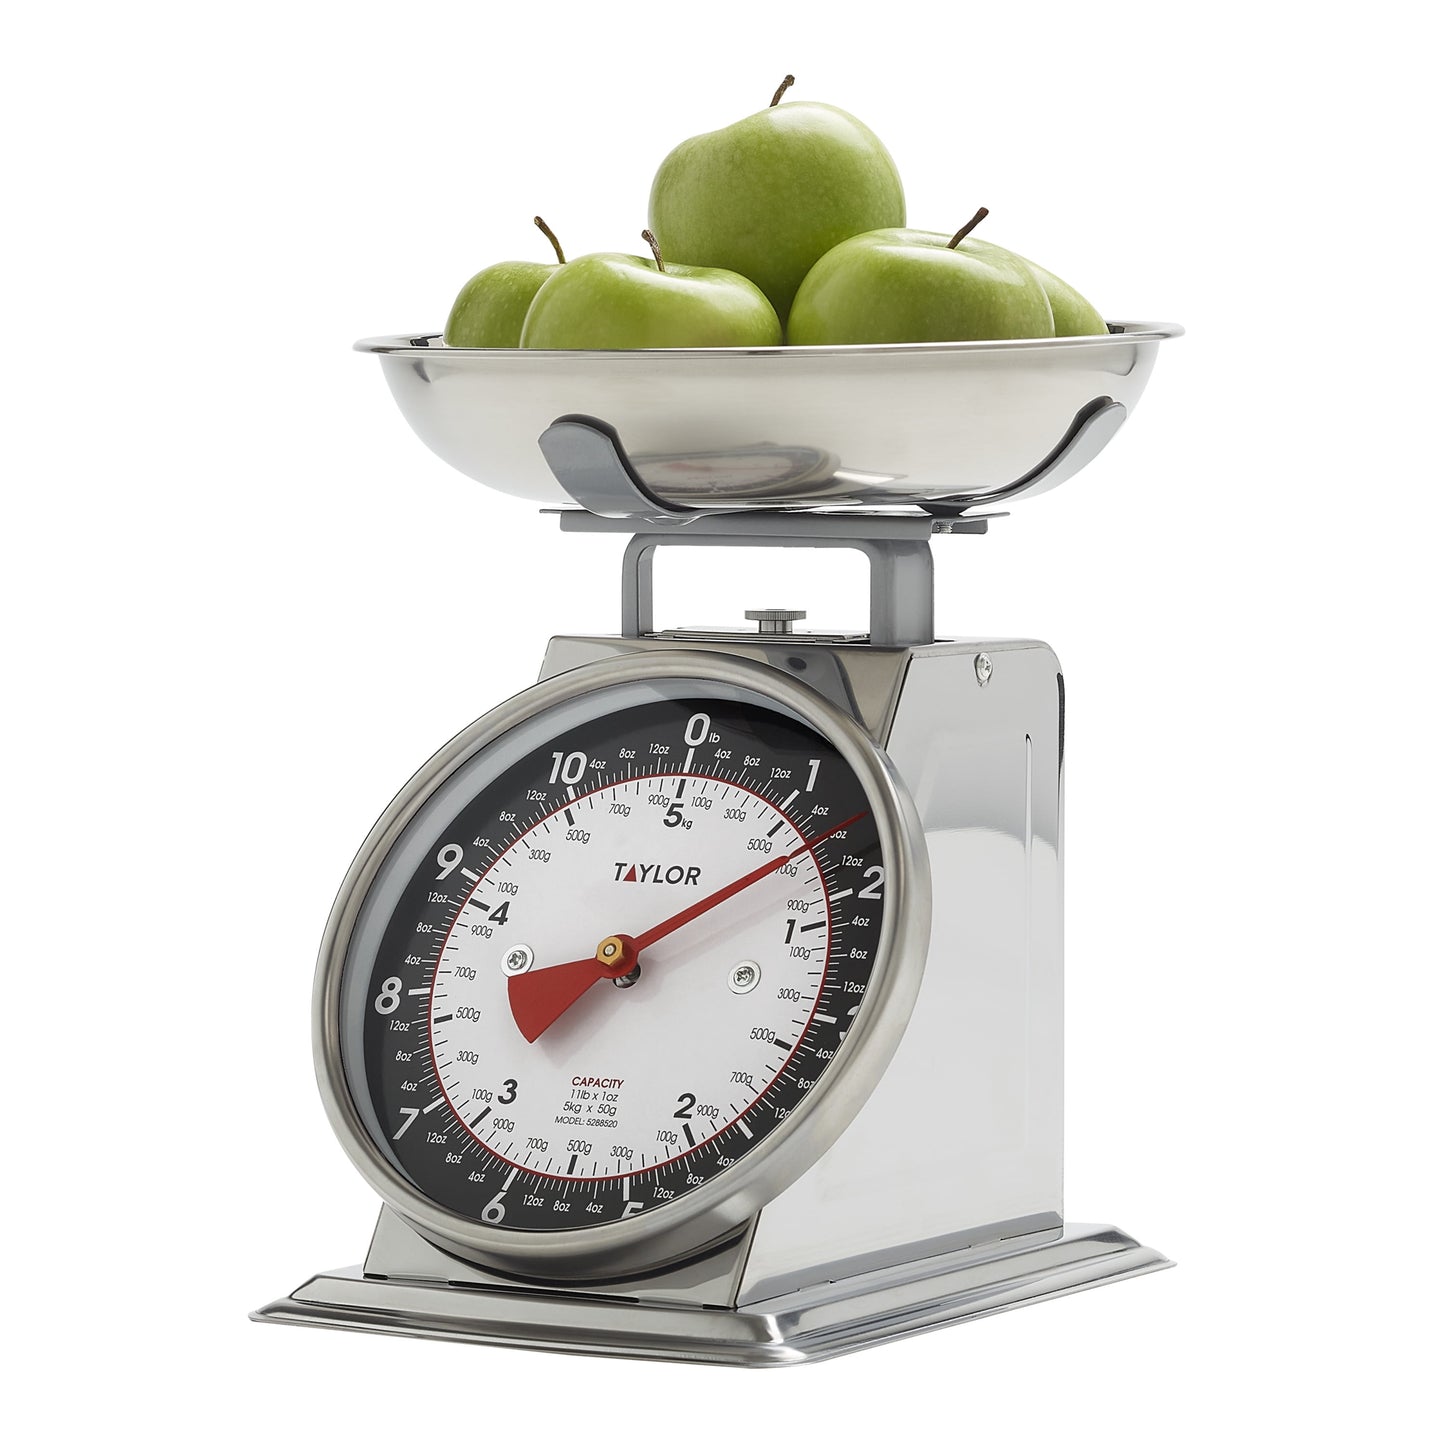 Taylor Modern Mechanical Kitchen Weighing Food Scale Weighs up to 11lbs, Measures in Grams and Ounces, Black and Silver